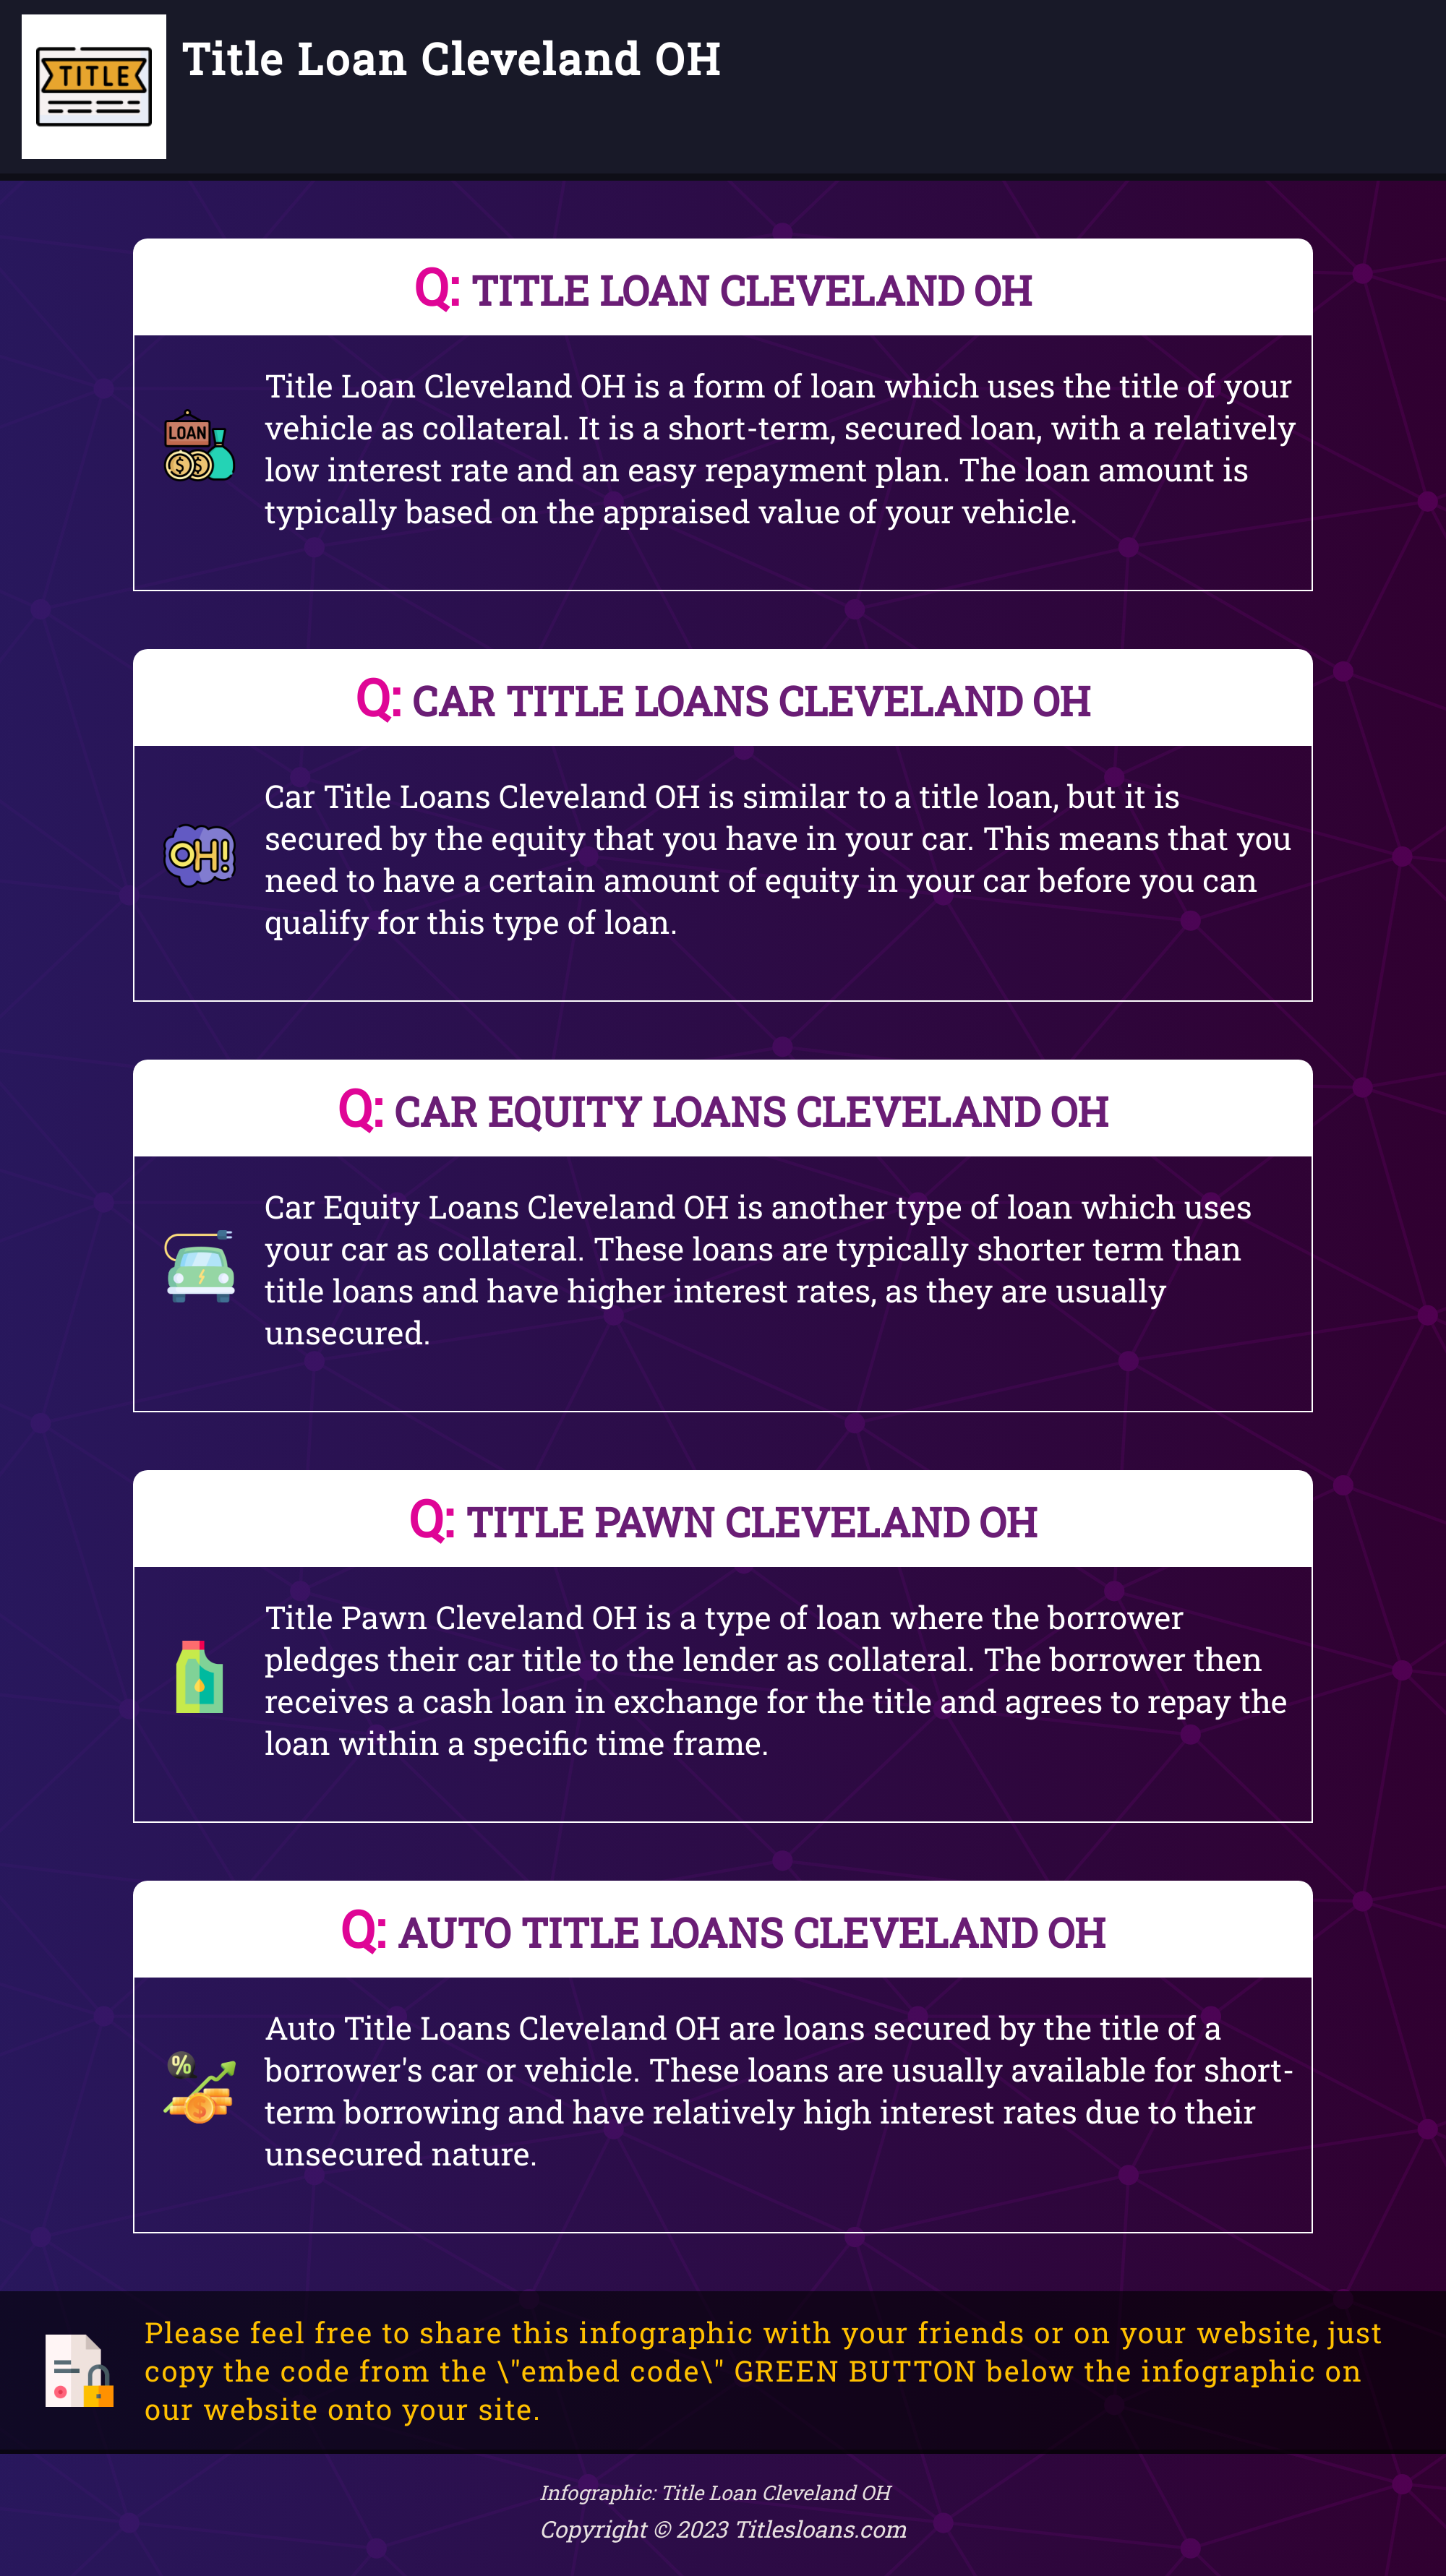 Infographic: Title Loan Cleveland OH  